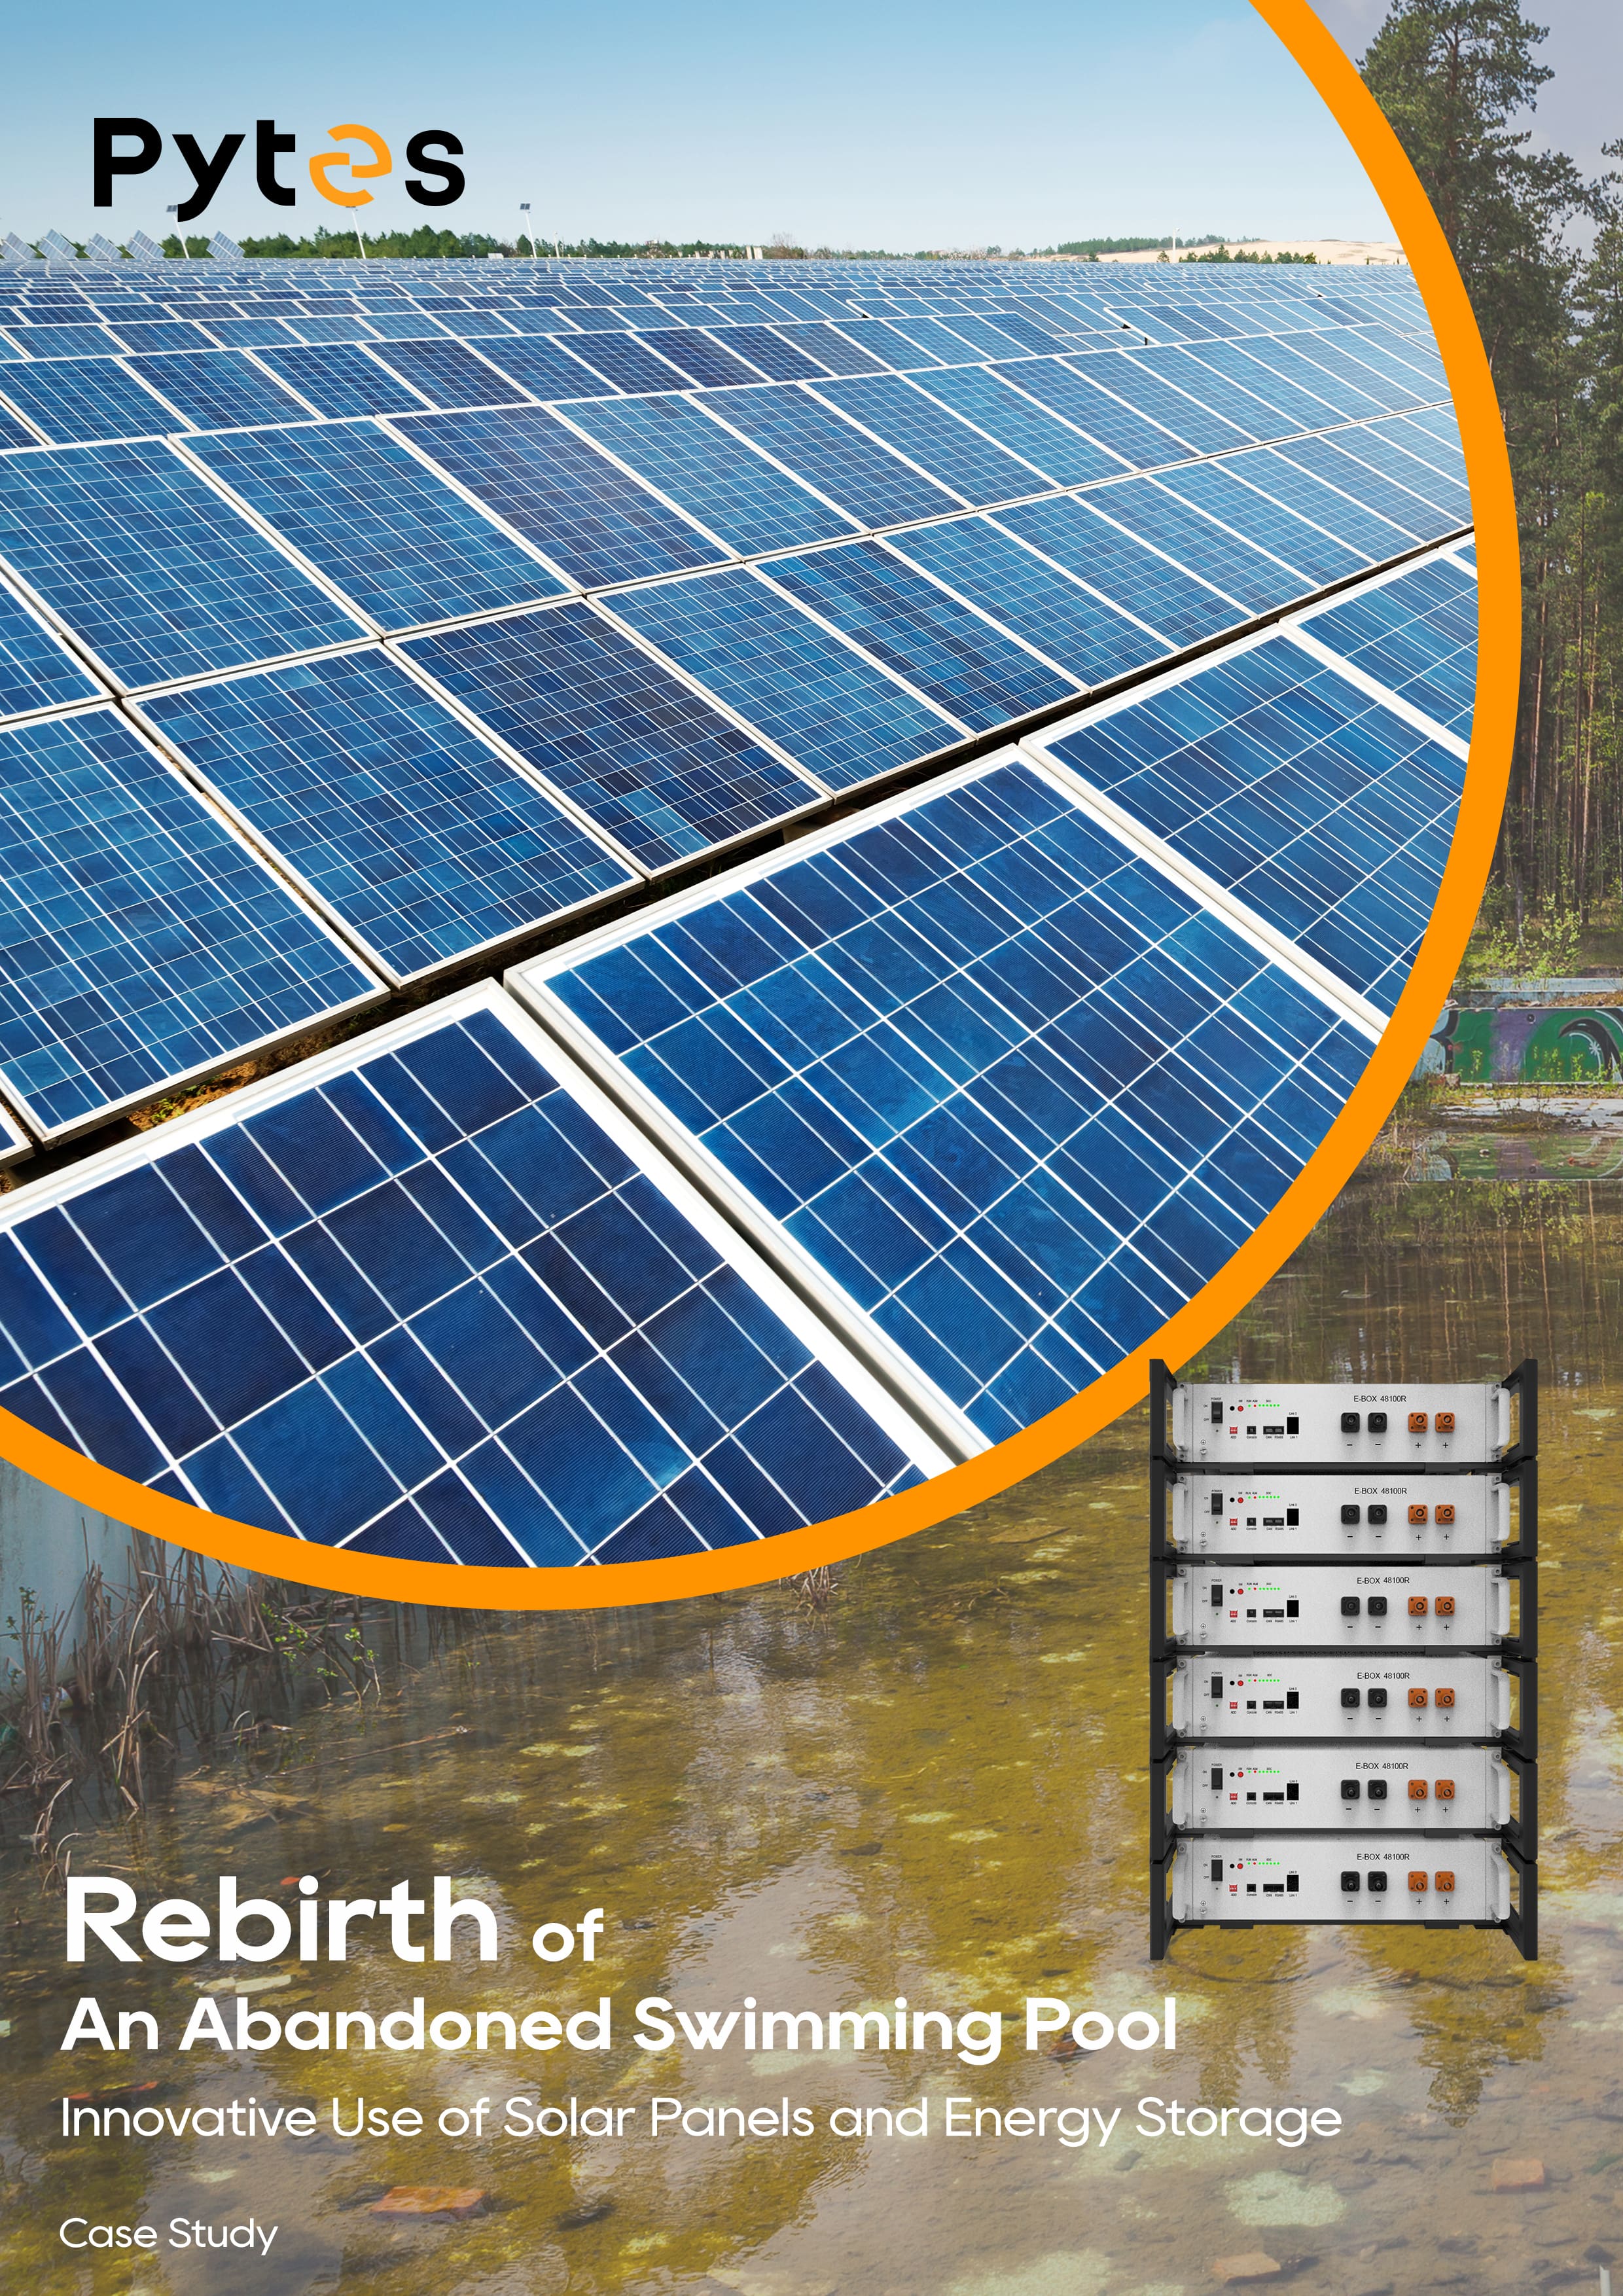 Rebirth of An Abandoned Swimming Pool - Innovative Use of Solar Panels and Energy Storage